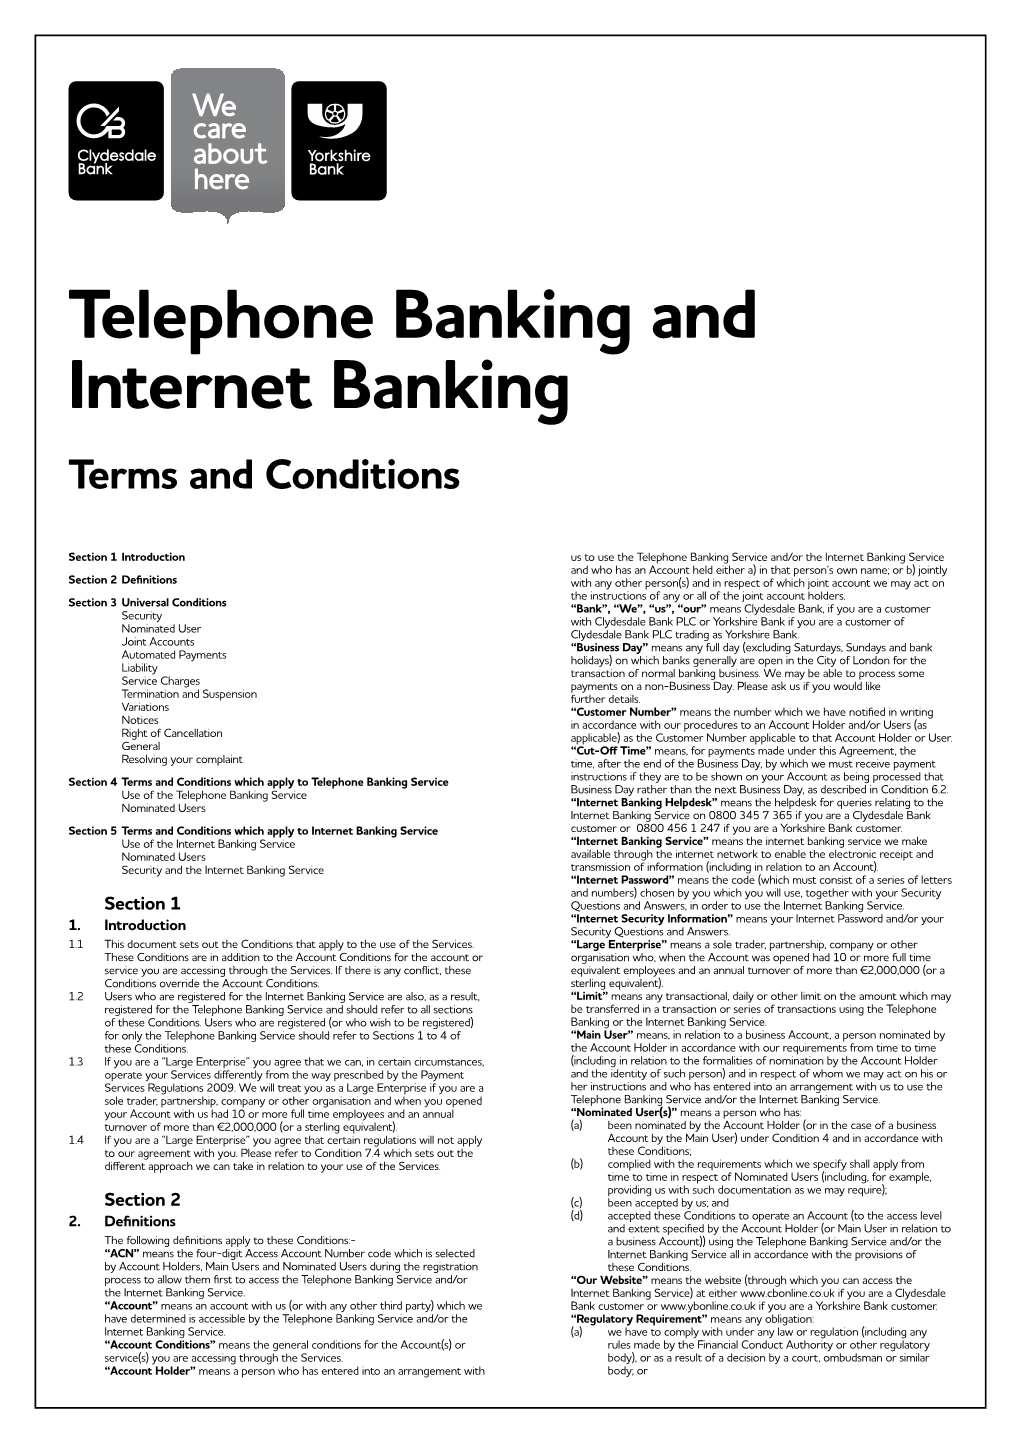 Telephone Banking and Internet Banking Terms and Conditions